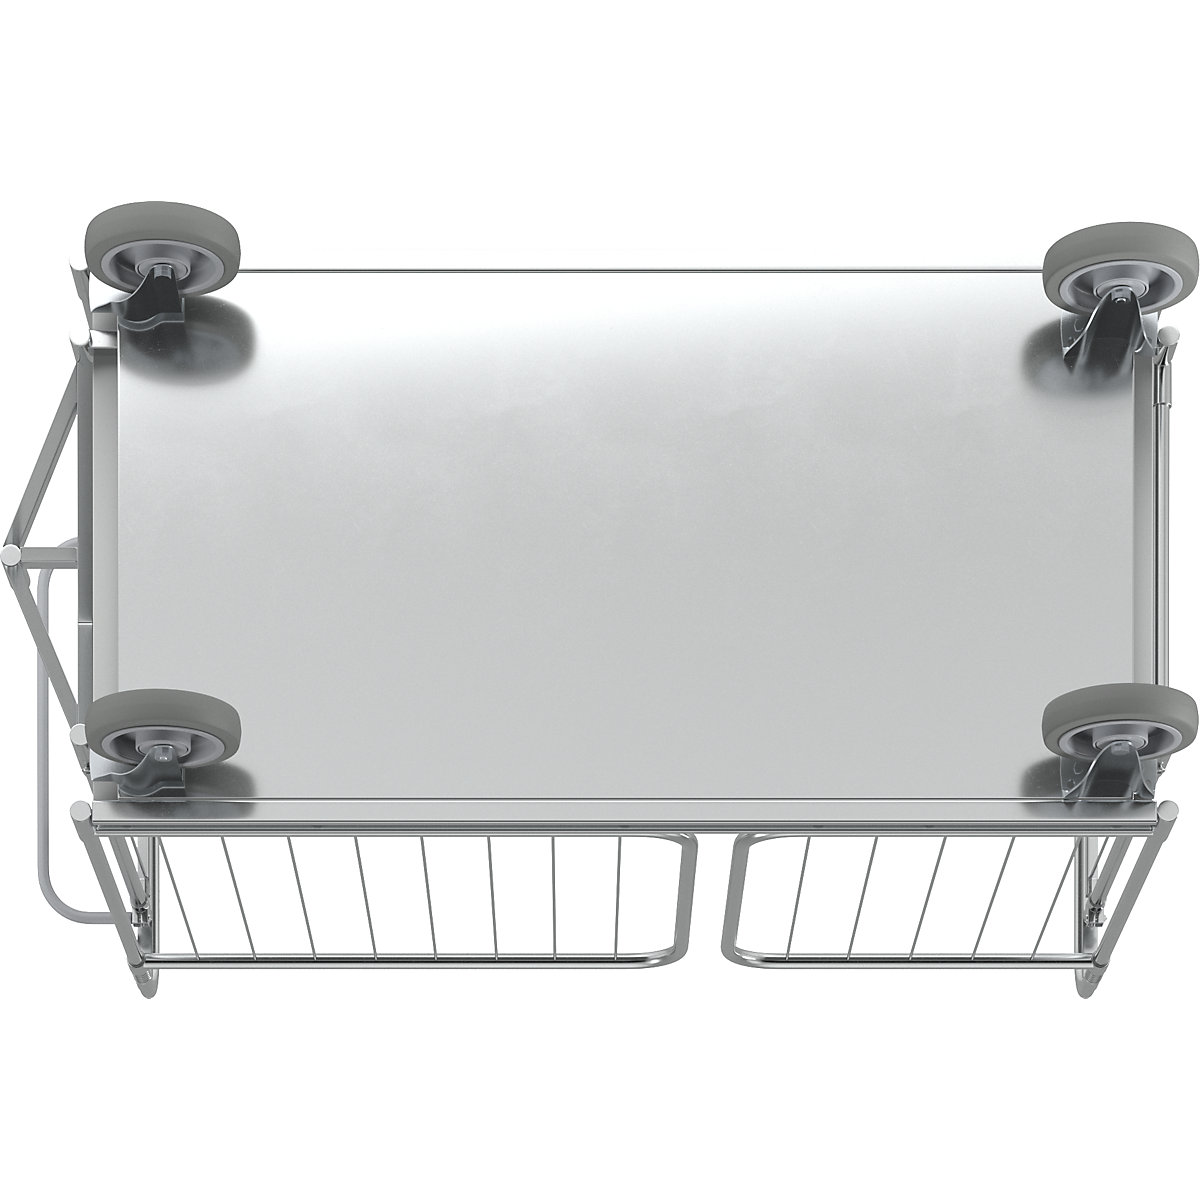 Trolley with panels on four sides – HelgeNyberg (Product illustration 10)-9